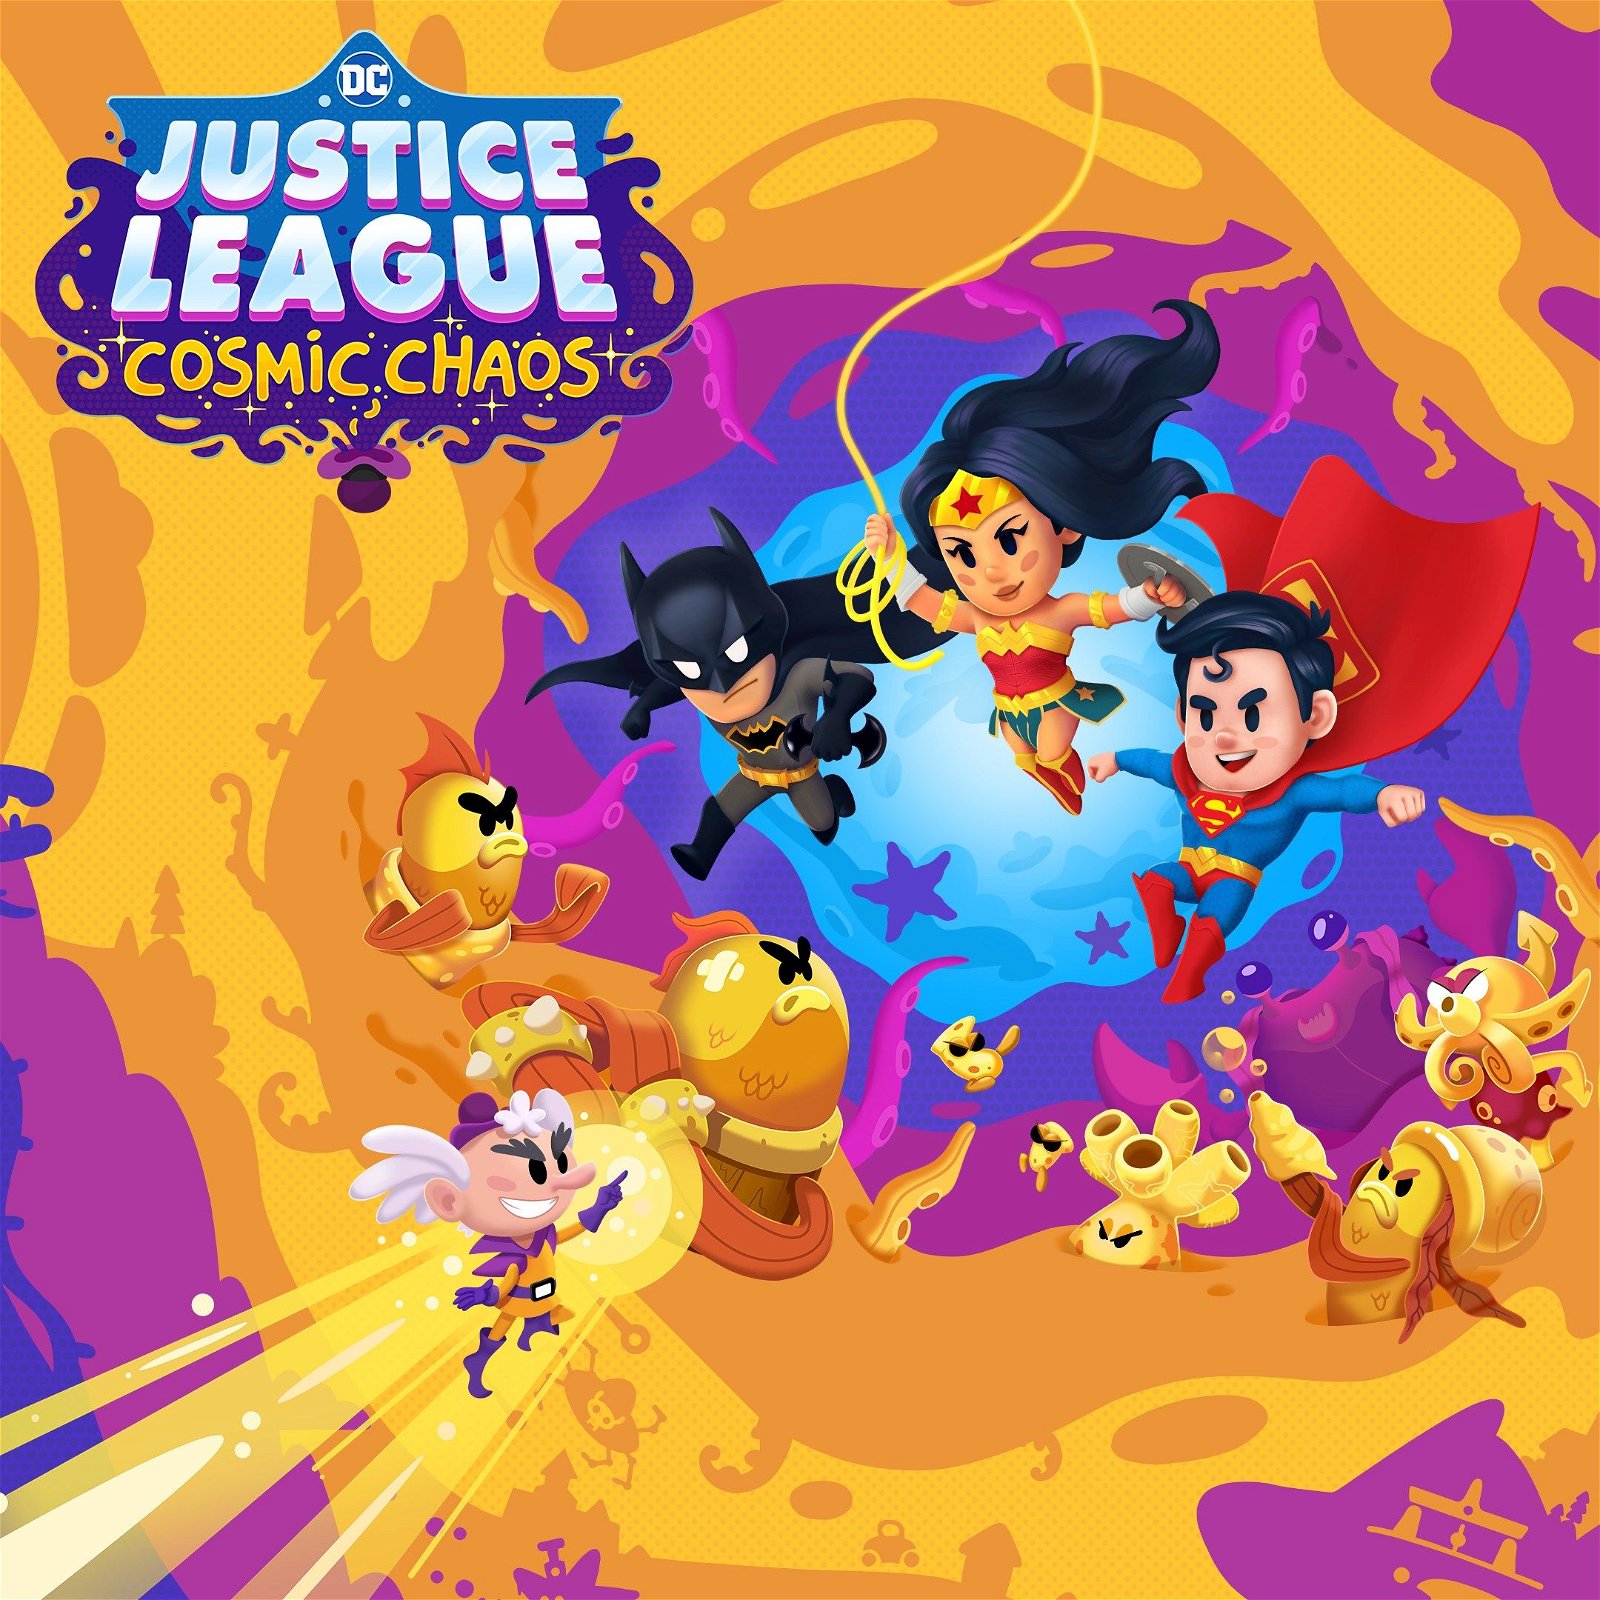 Image of DC's Justice League: Cosmic Chaos